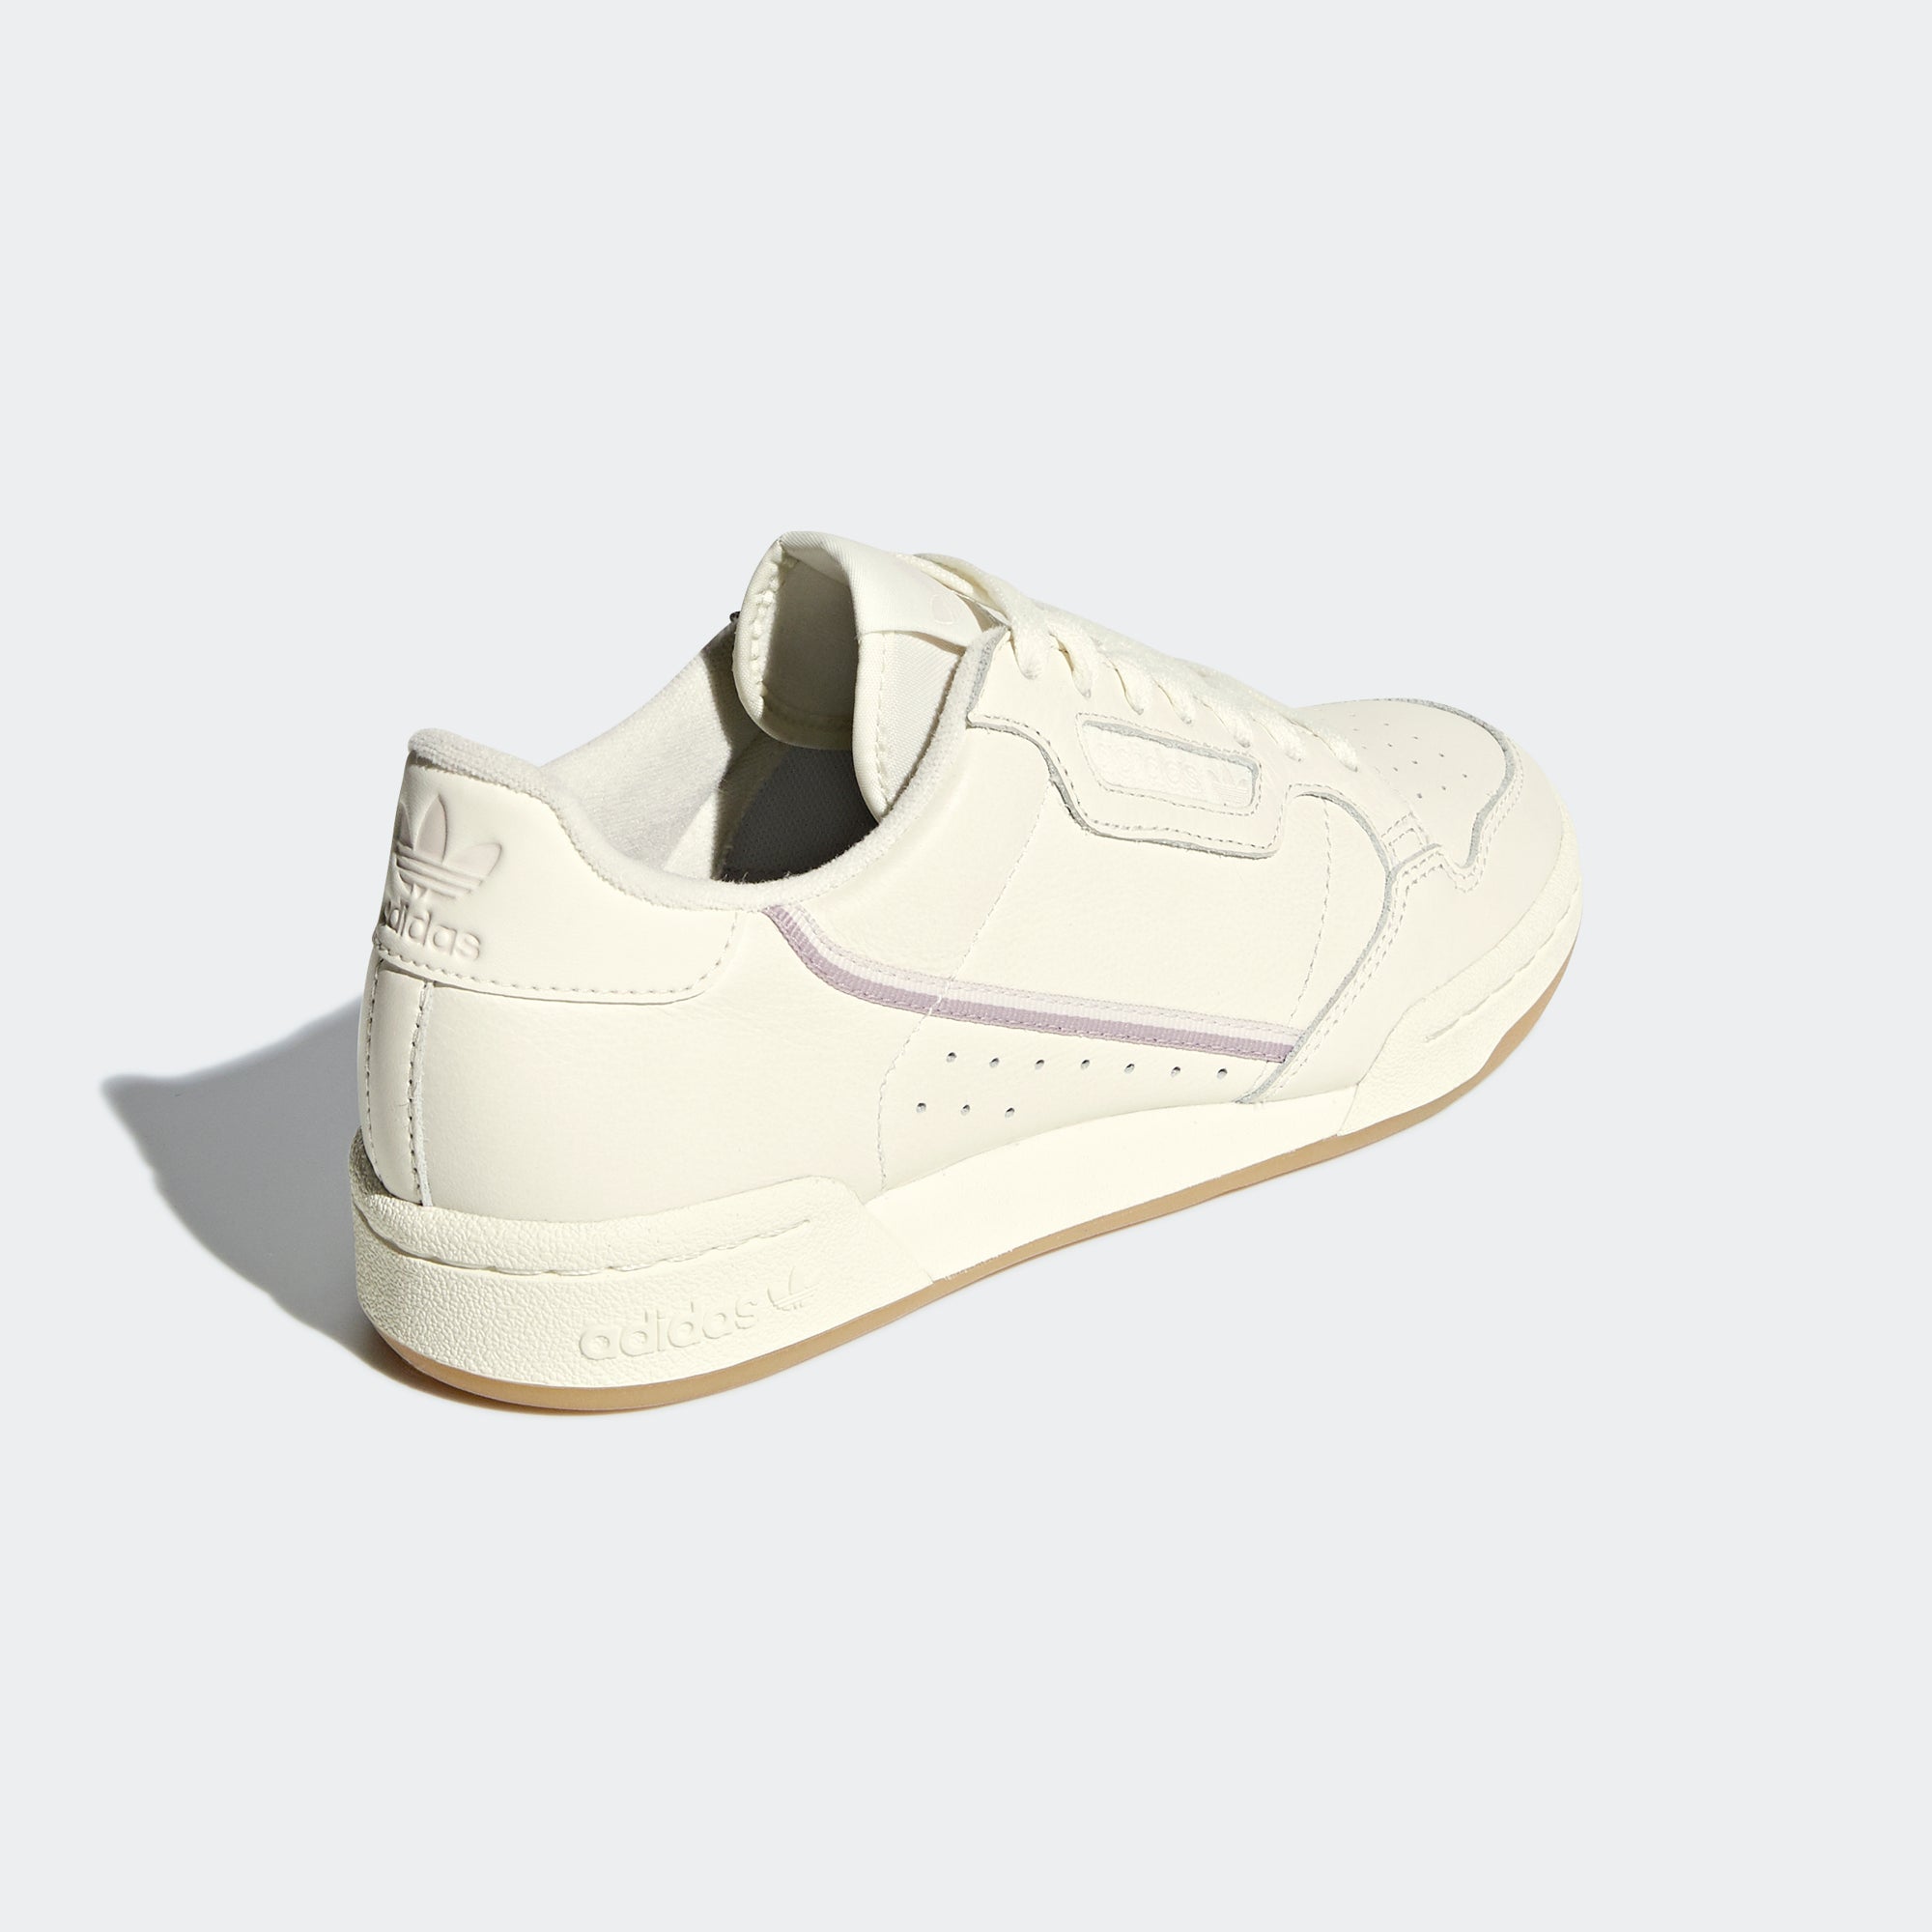 adidas continental 80 womens off white